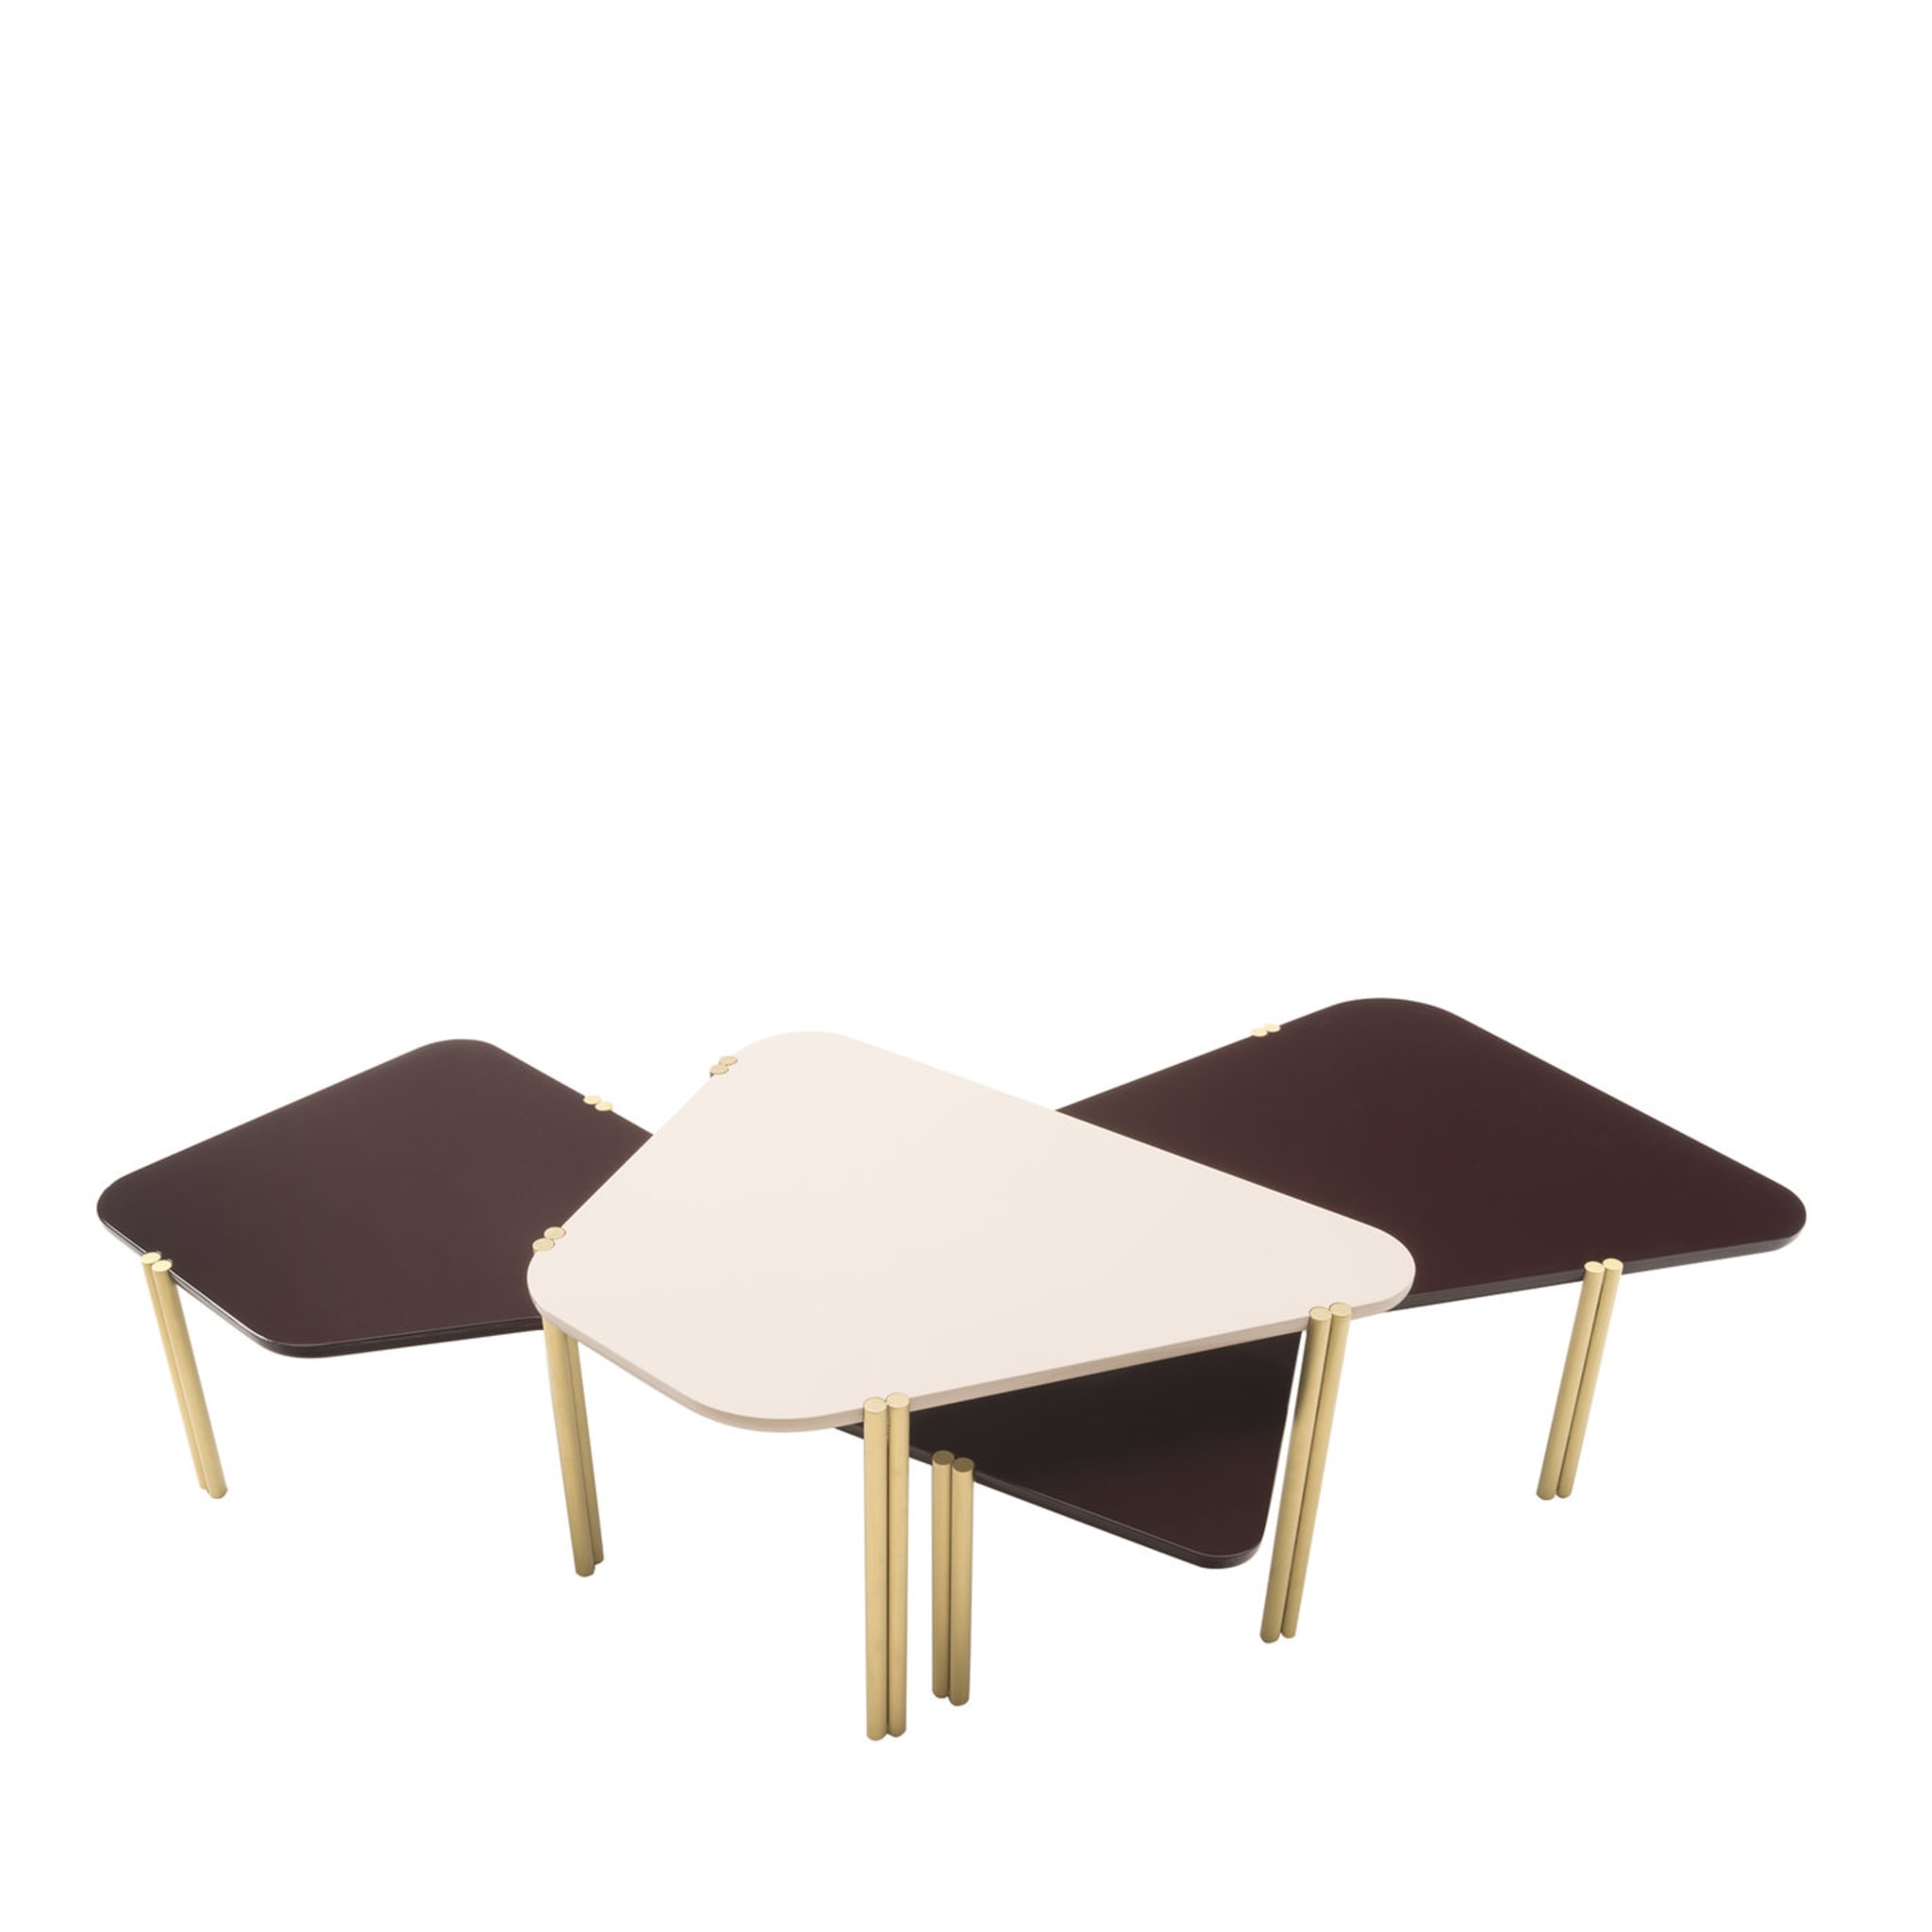 Dark & Light Jean Stackable Tables - Main view